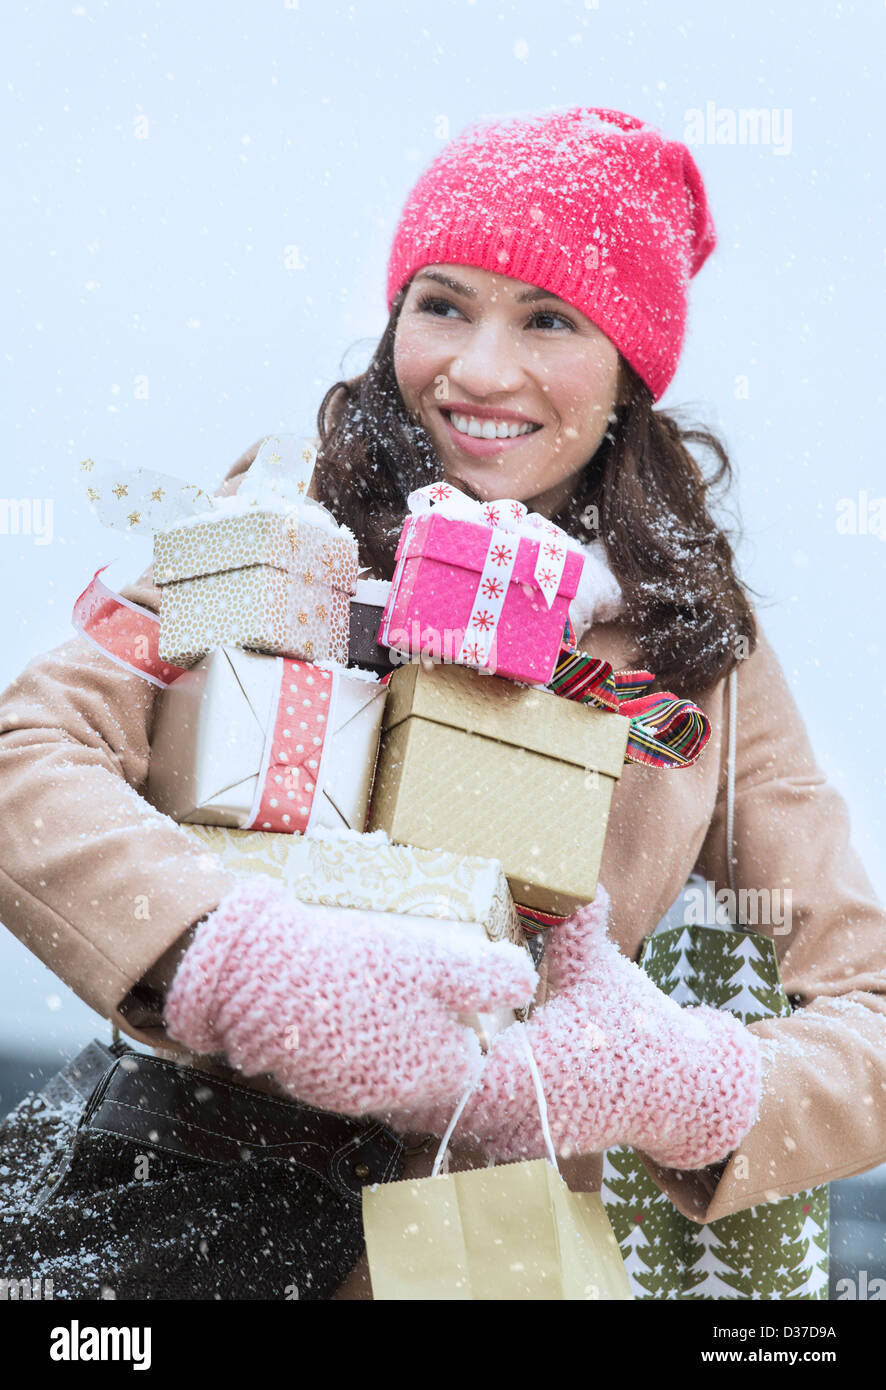 USA, New Jersey, Jersey City, Portrait of woman in winter clothes carrying presents Stock Photo